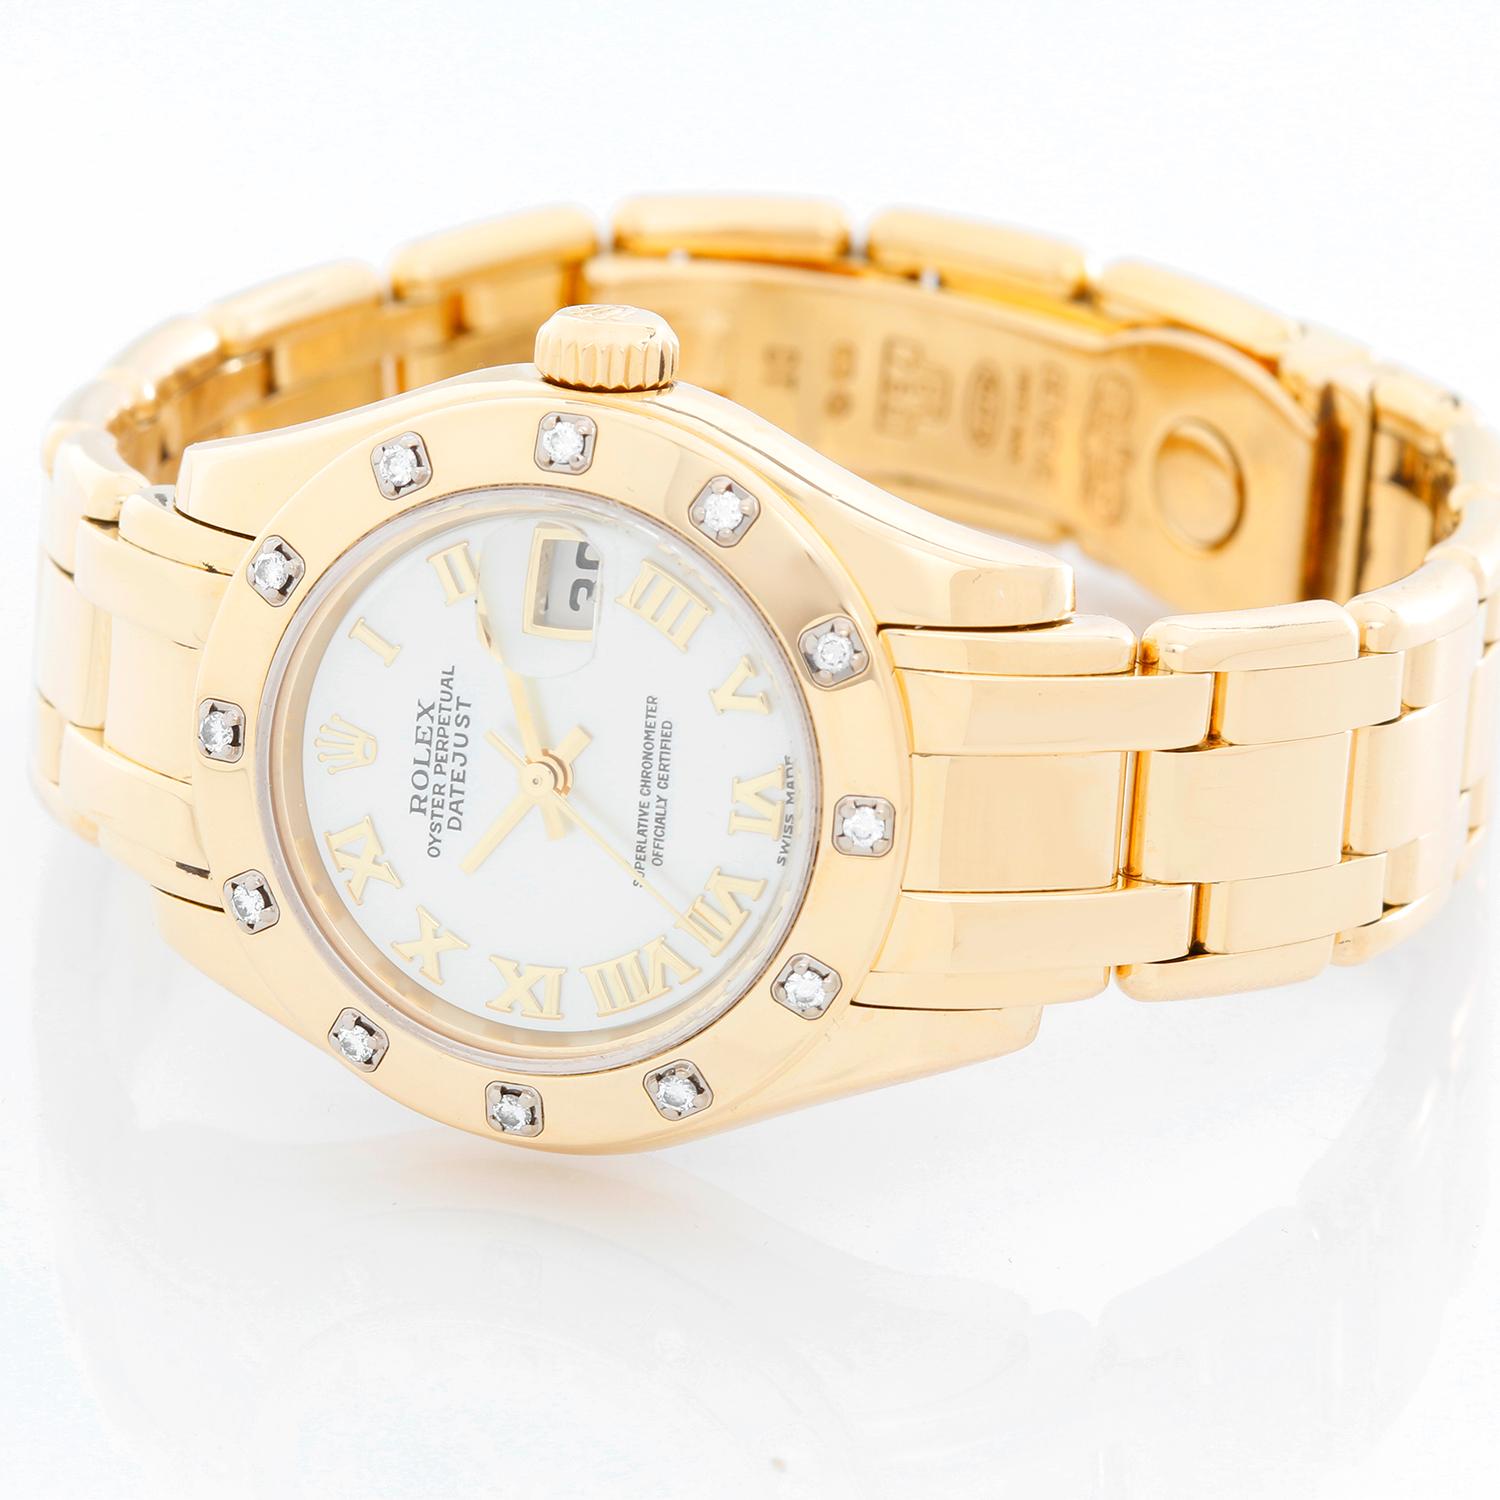 Rolex Lady Datejust Pearlmaster 18k Yellow Gold Ladies Diamond Watch 80318 - Automatic winding, 31 jewels, Quickset, sapphire crystal. 18k yellow gold case with factory 12 diamond bezel (29mm diameter). Genuine Rolex Mother of Pearl dial with Roman